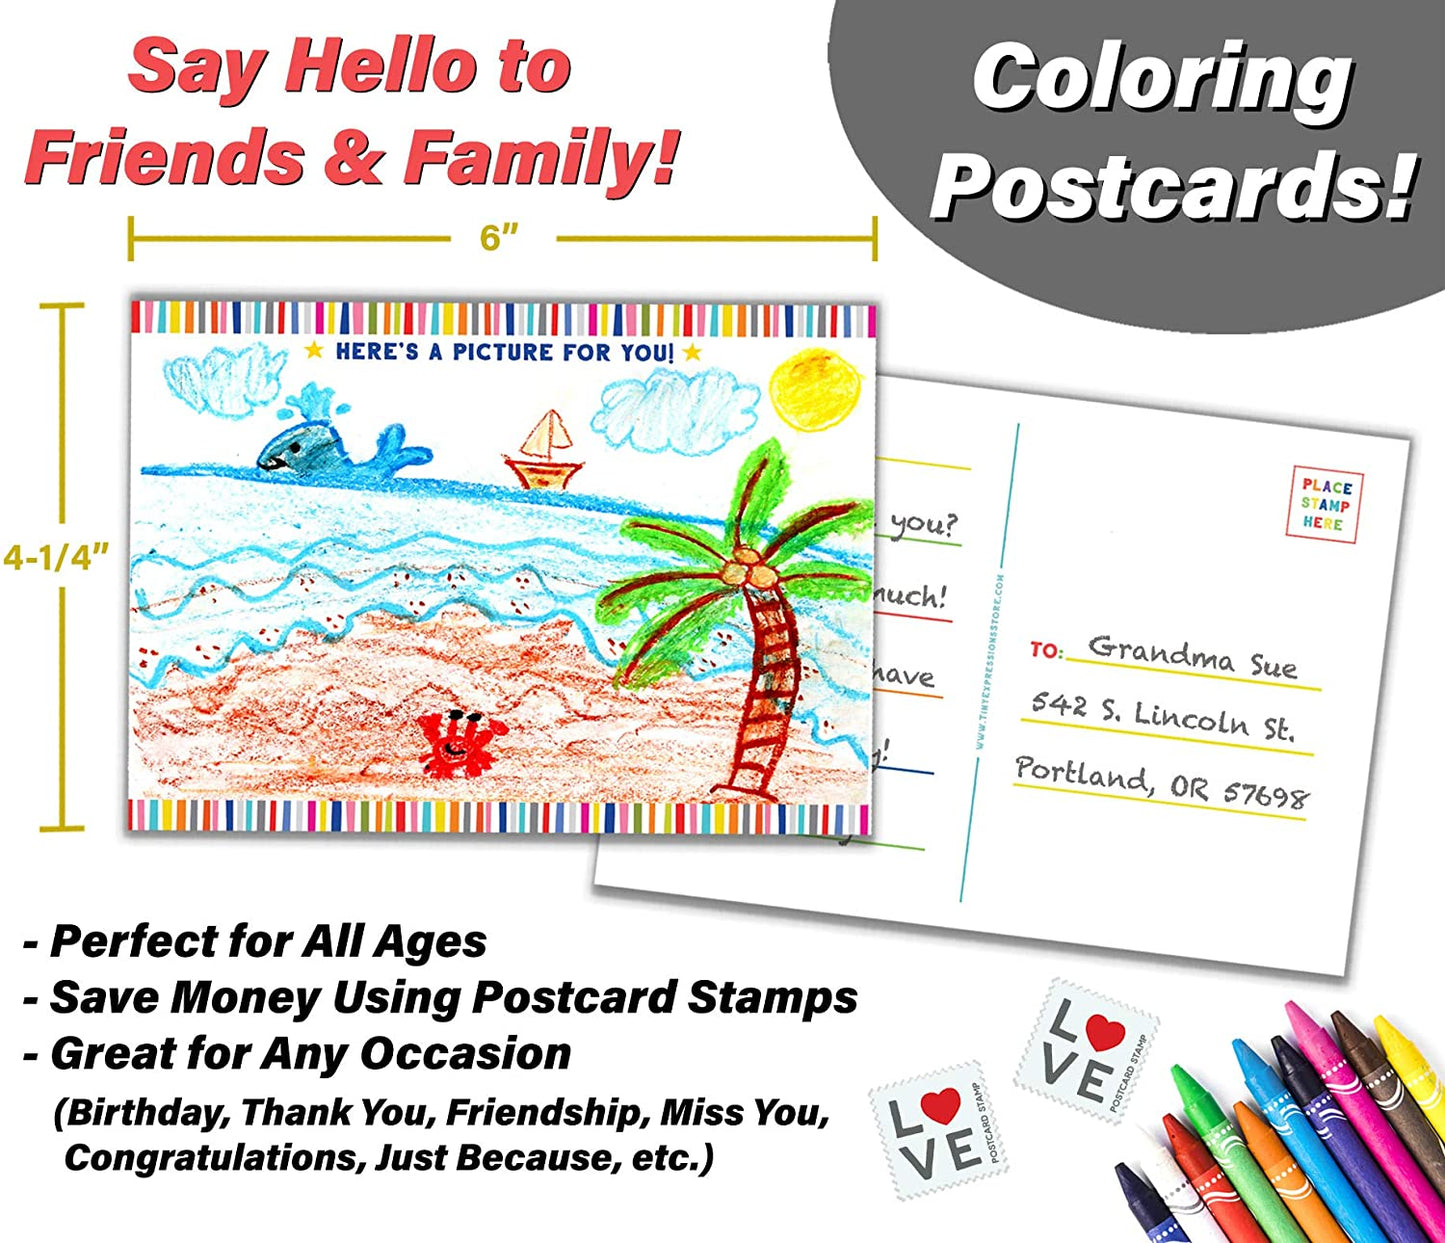 Coloring Post Cards